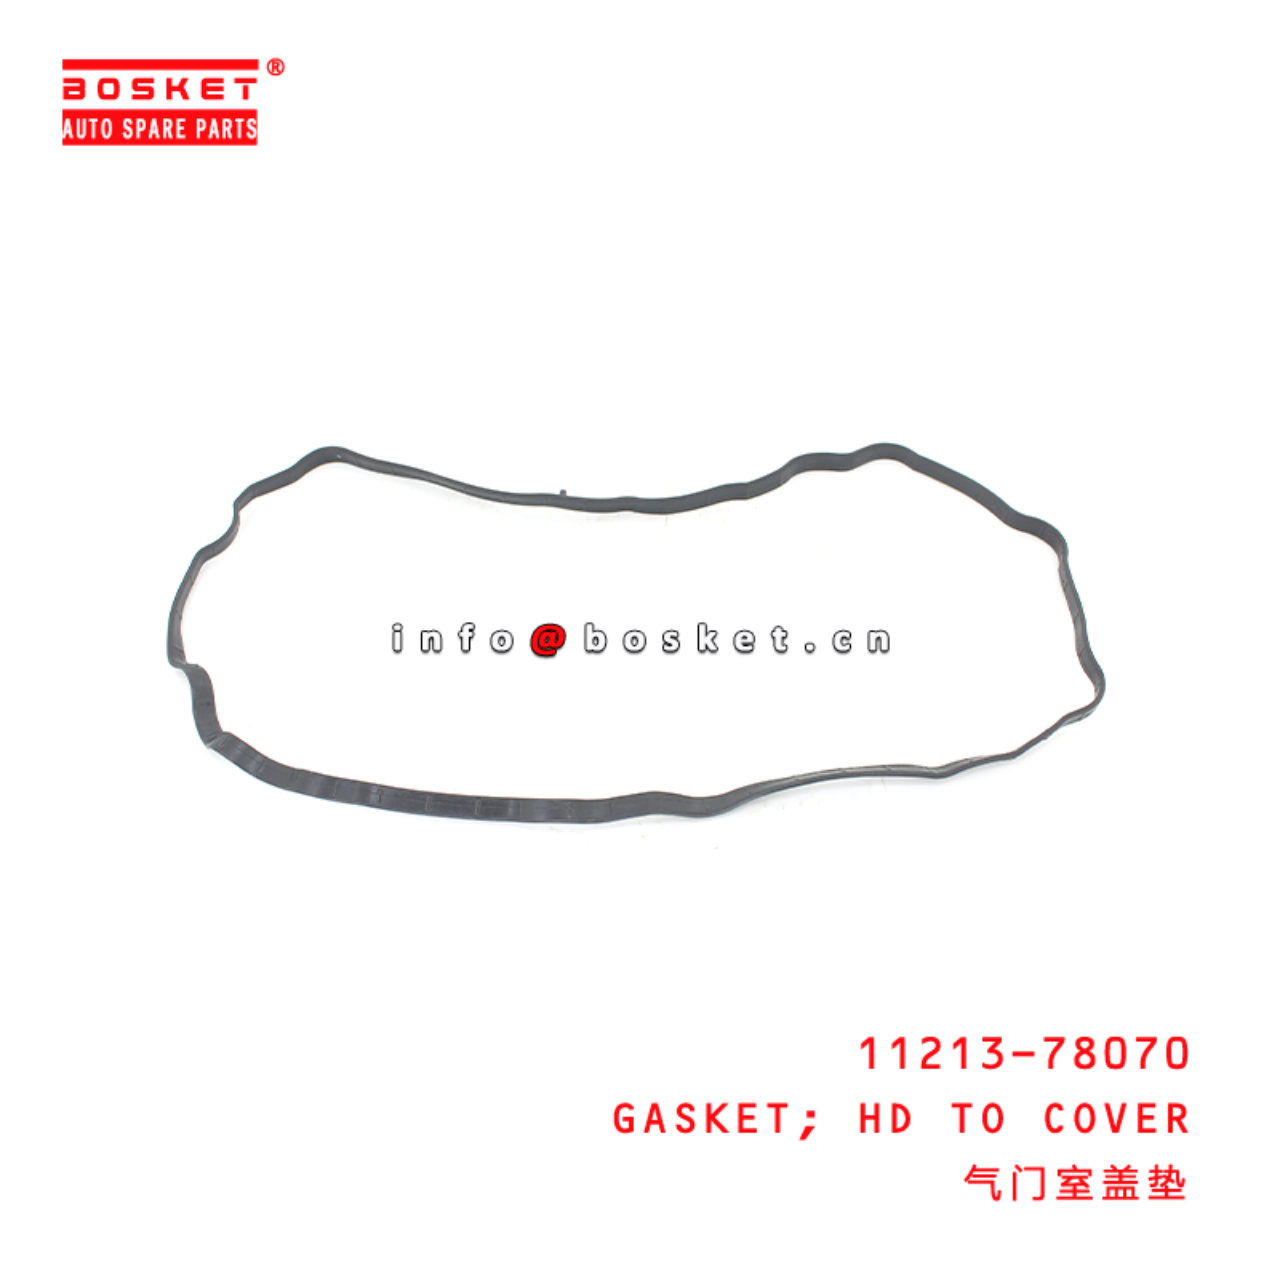 11213-78070 Head To Cover Gasket Suitable for ISUZU HINO300